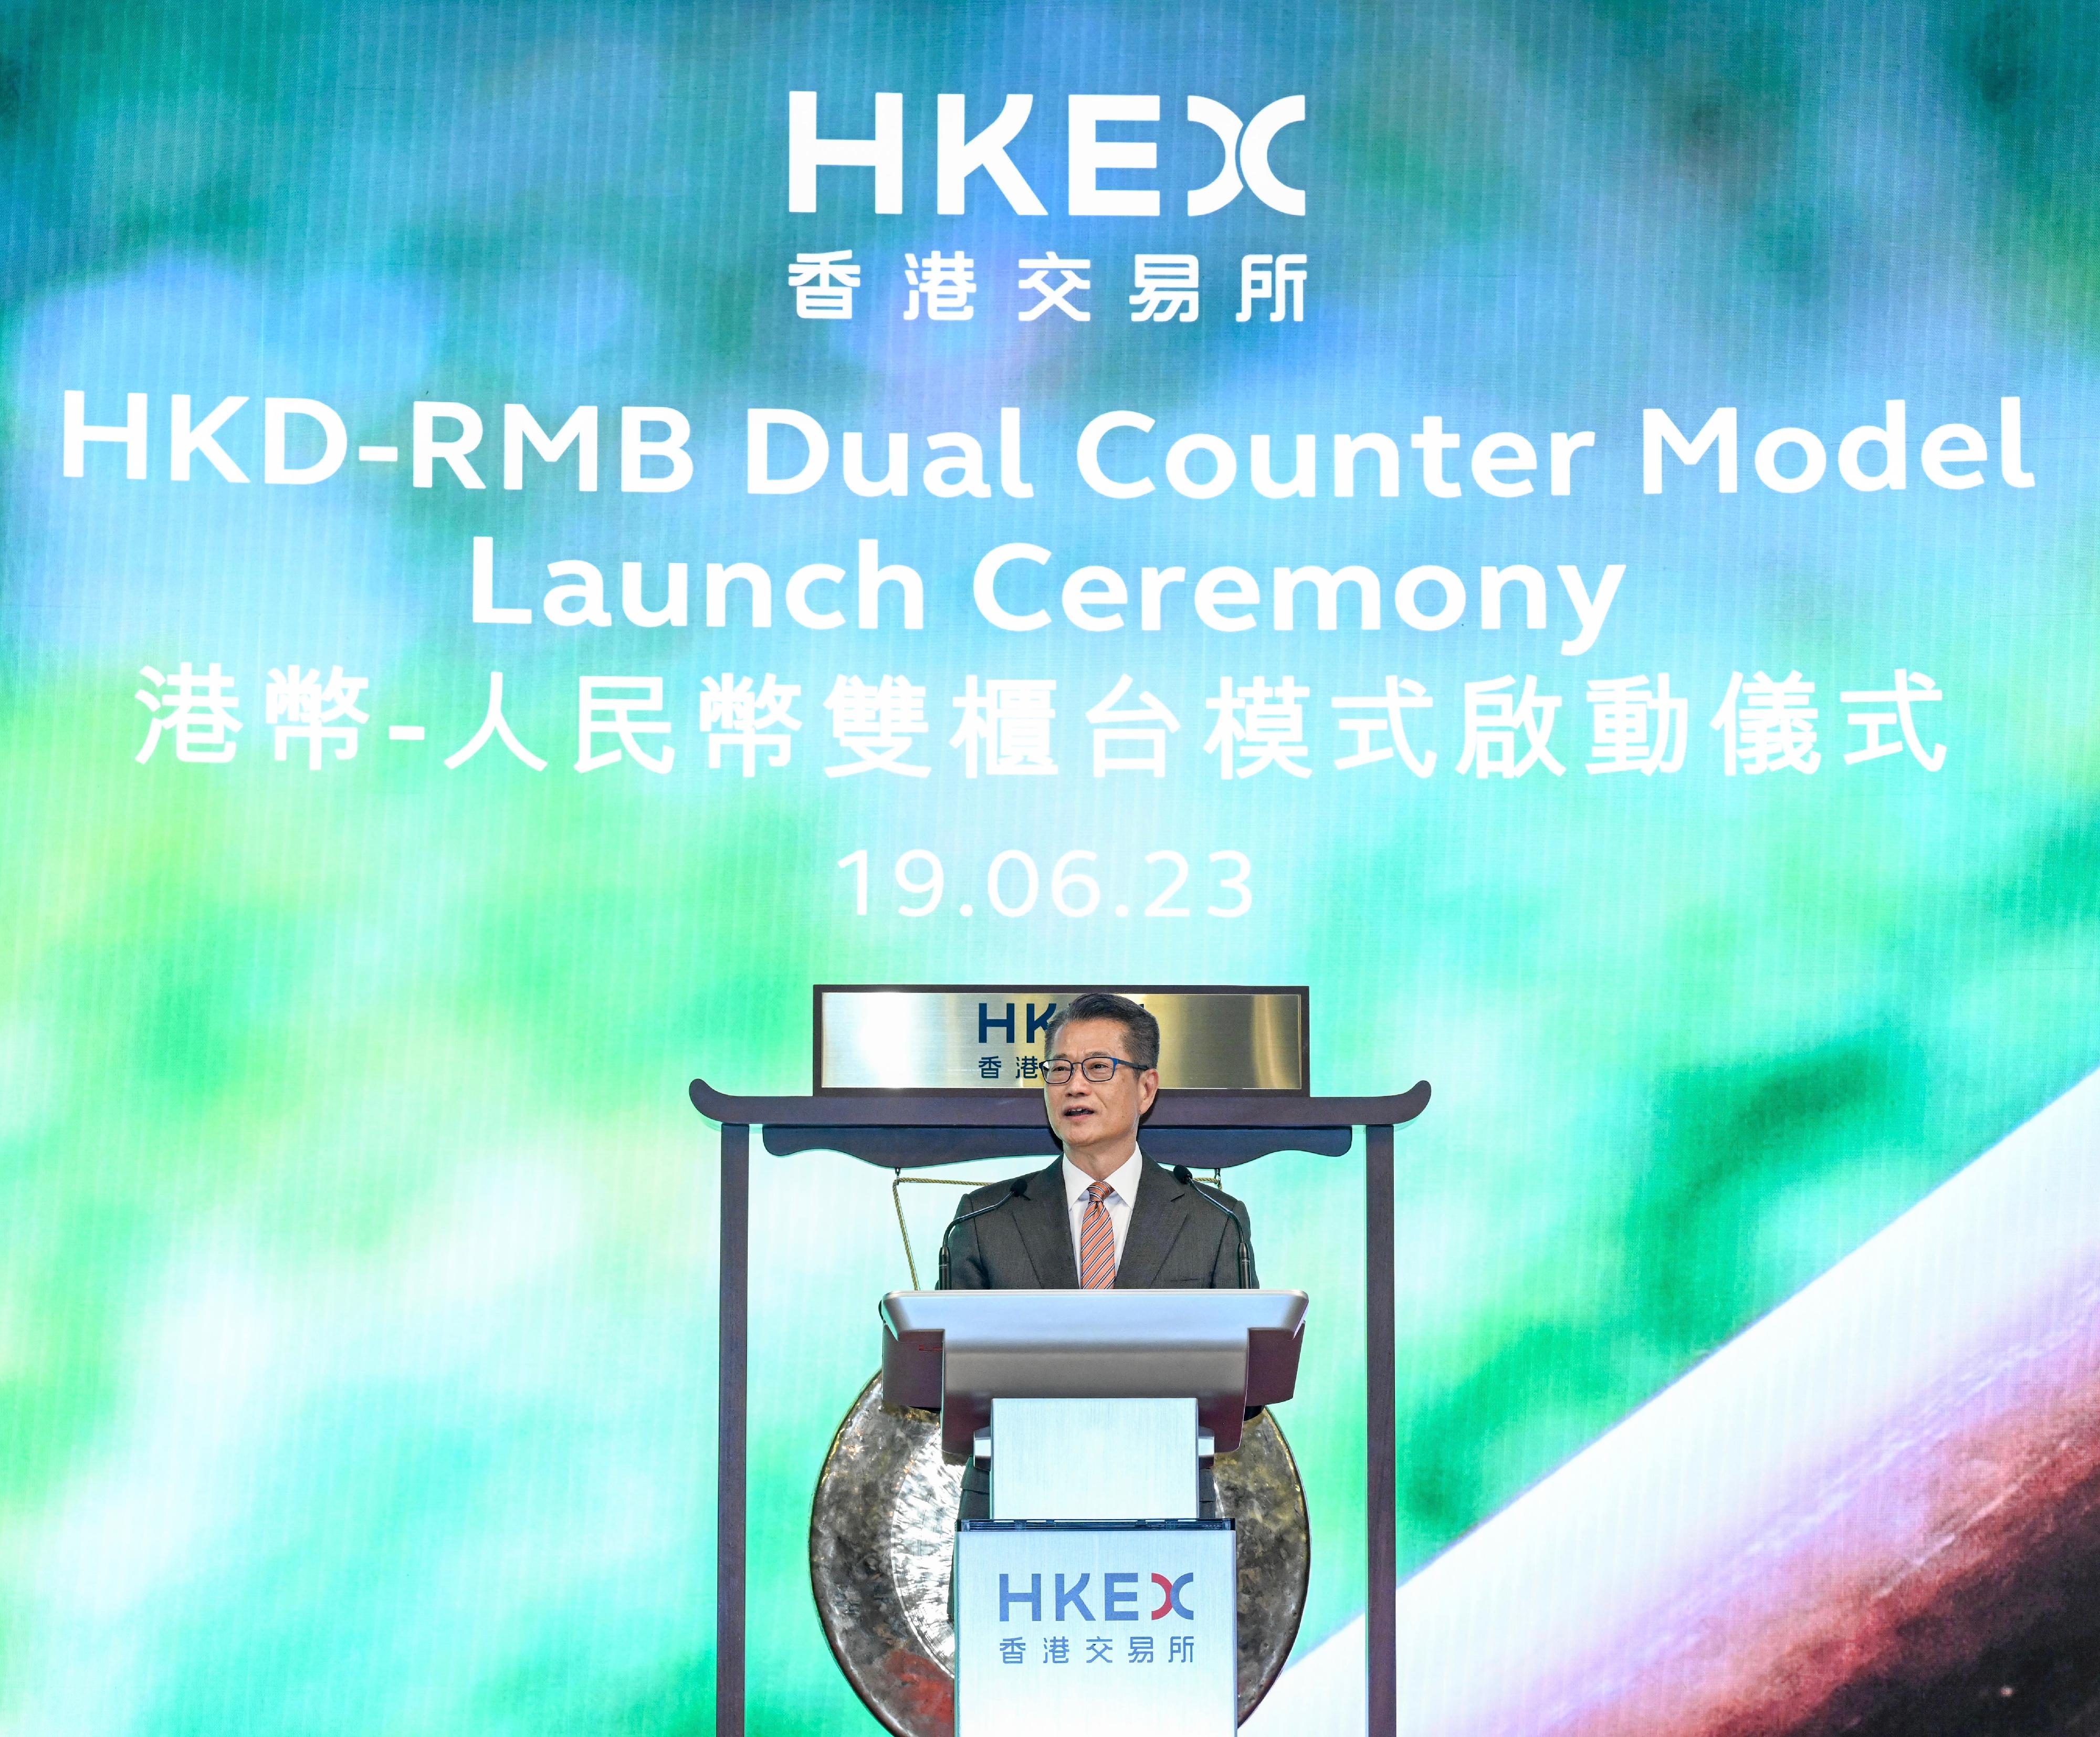 The Financial Secretary, Mr Paul Chan, speaks at the HKD-RMB Dual Counter Model Launch Ceremony today (June 19).